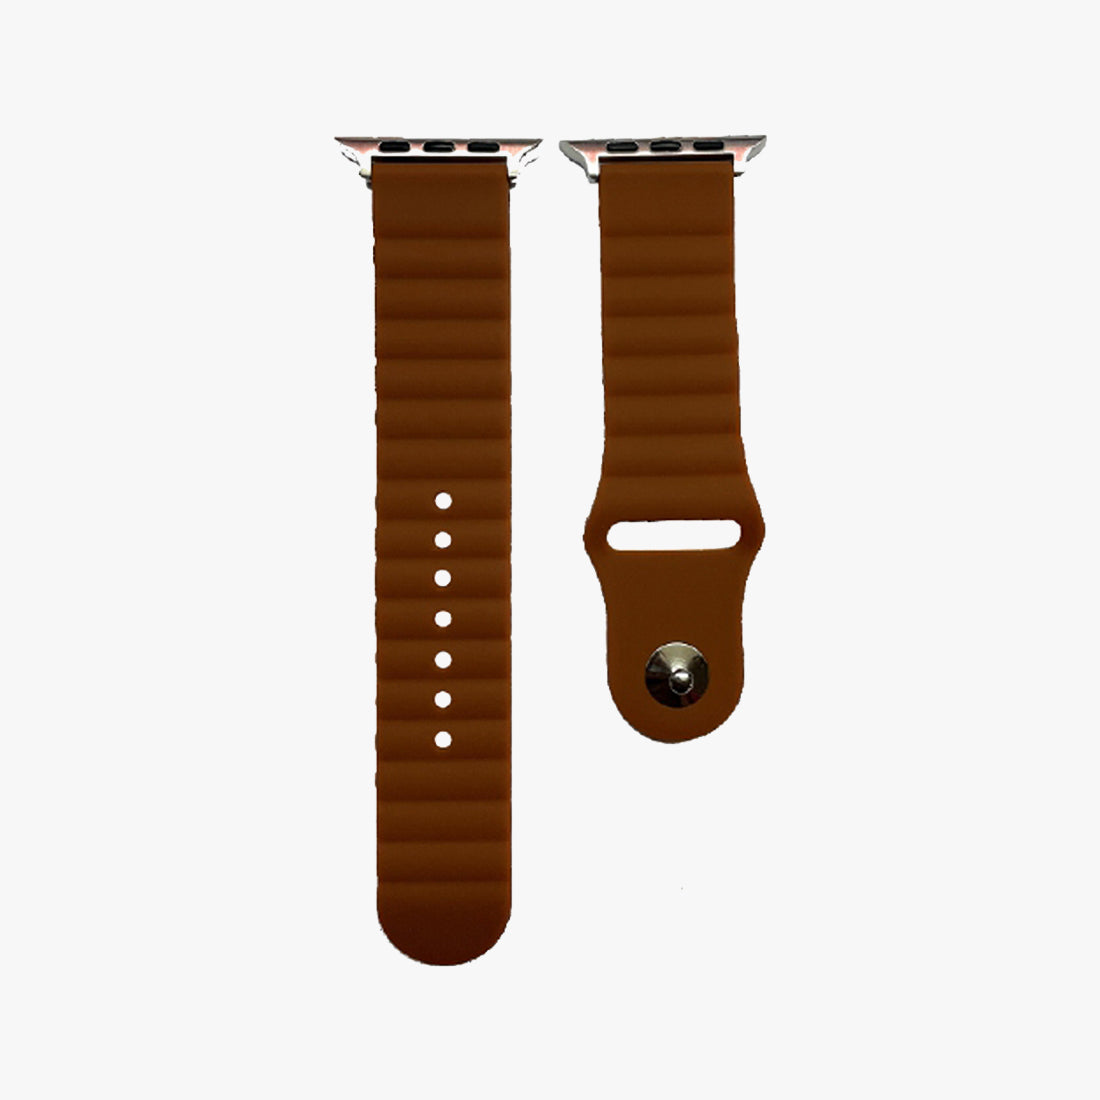 Ribbed Textured Silicon Strap for Apple Watch